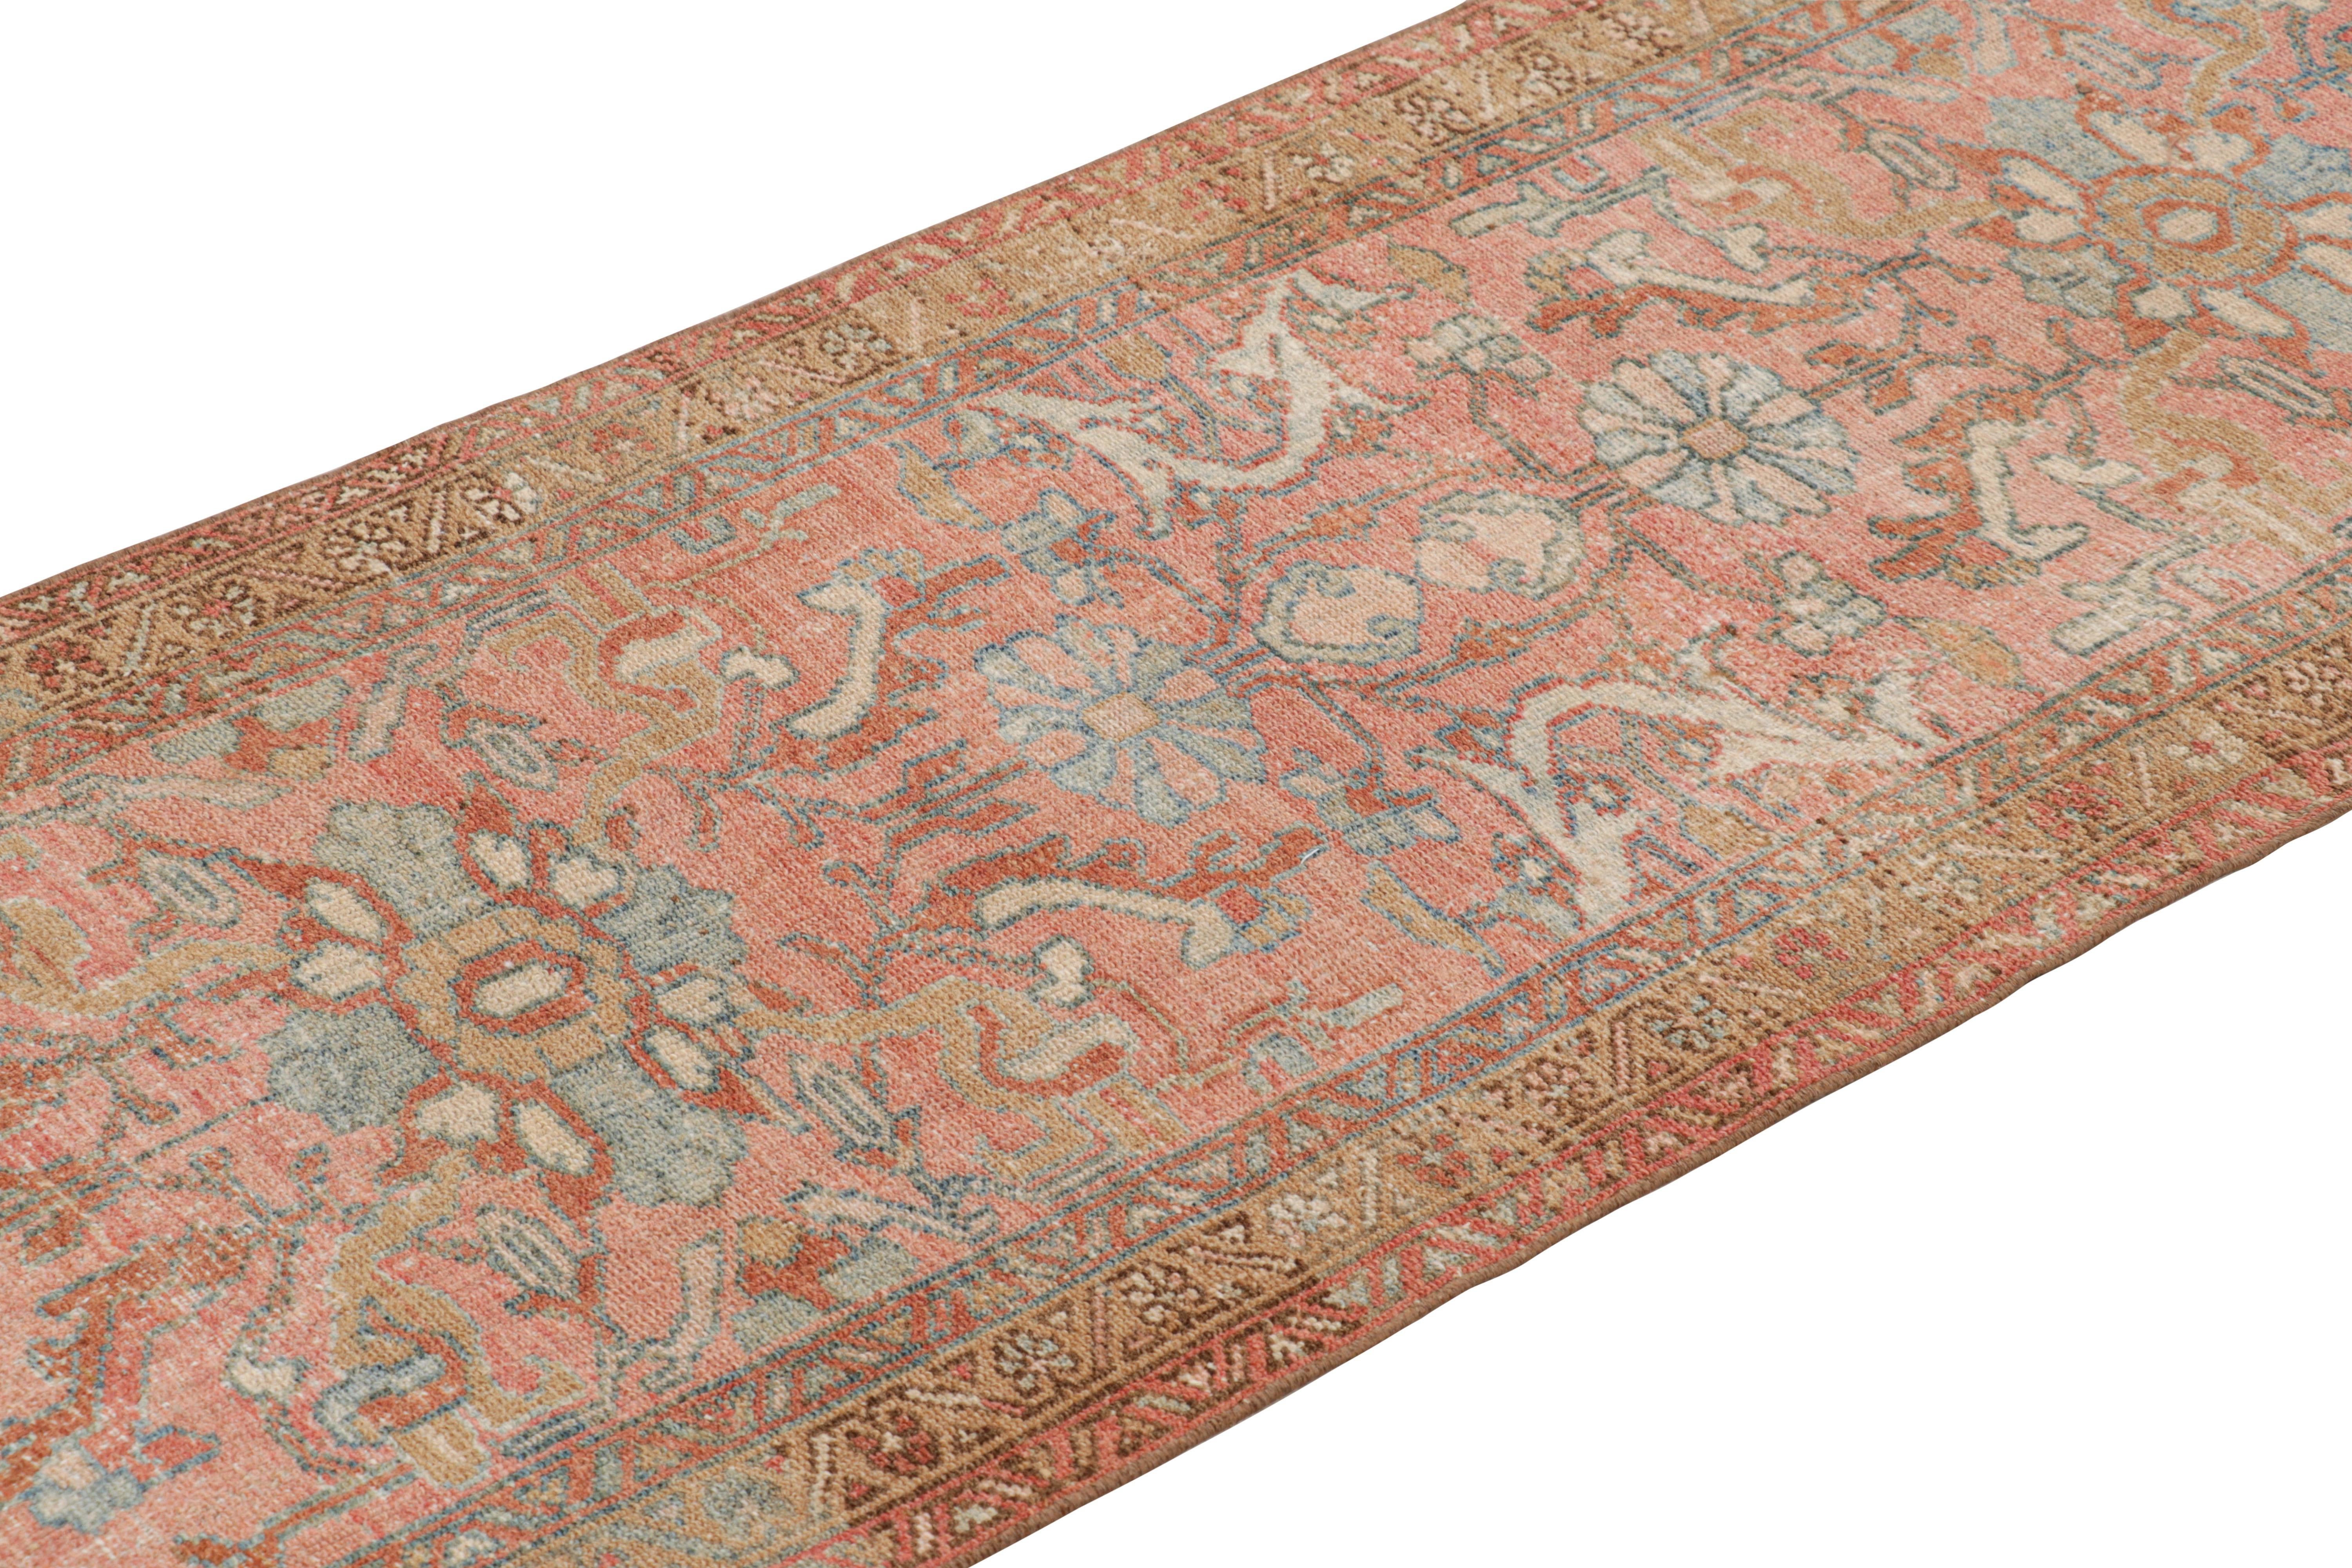 Hand-knotted in wool circa 1950-1960, this 2x10 vintage Turkish runner is inspired by Bakhtiari tribal rug designs. 

On the Design: 

A particularly warm and bright play of all over and medallion style floral patterns underscores this piece. The